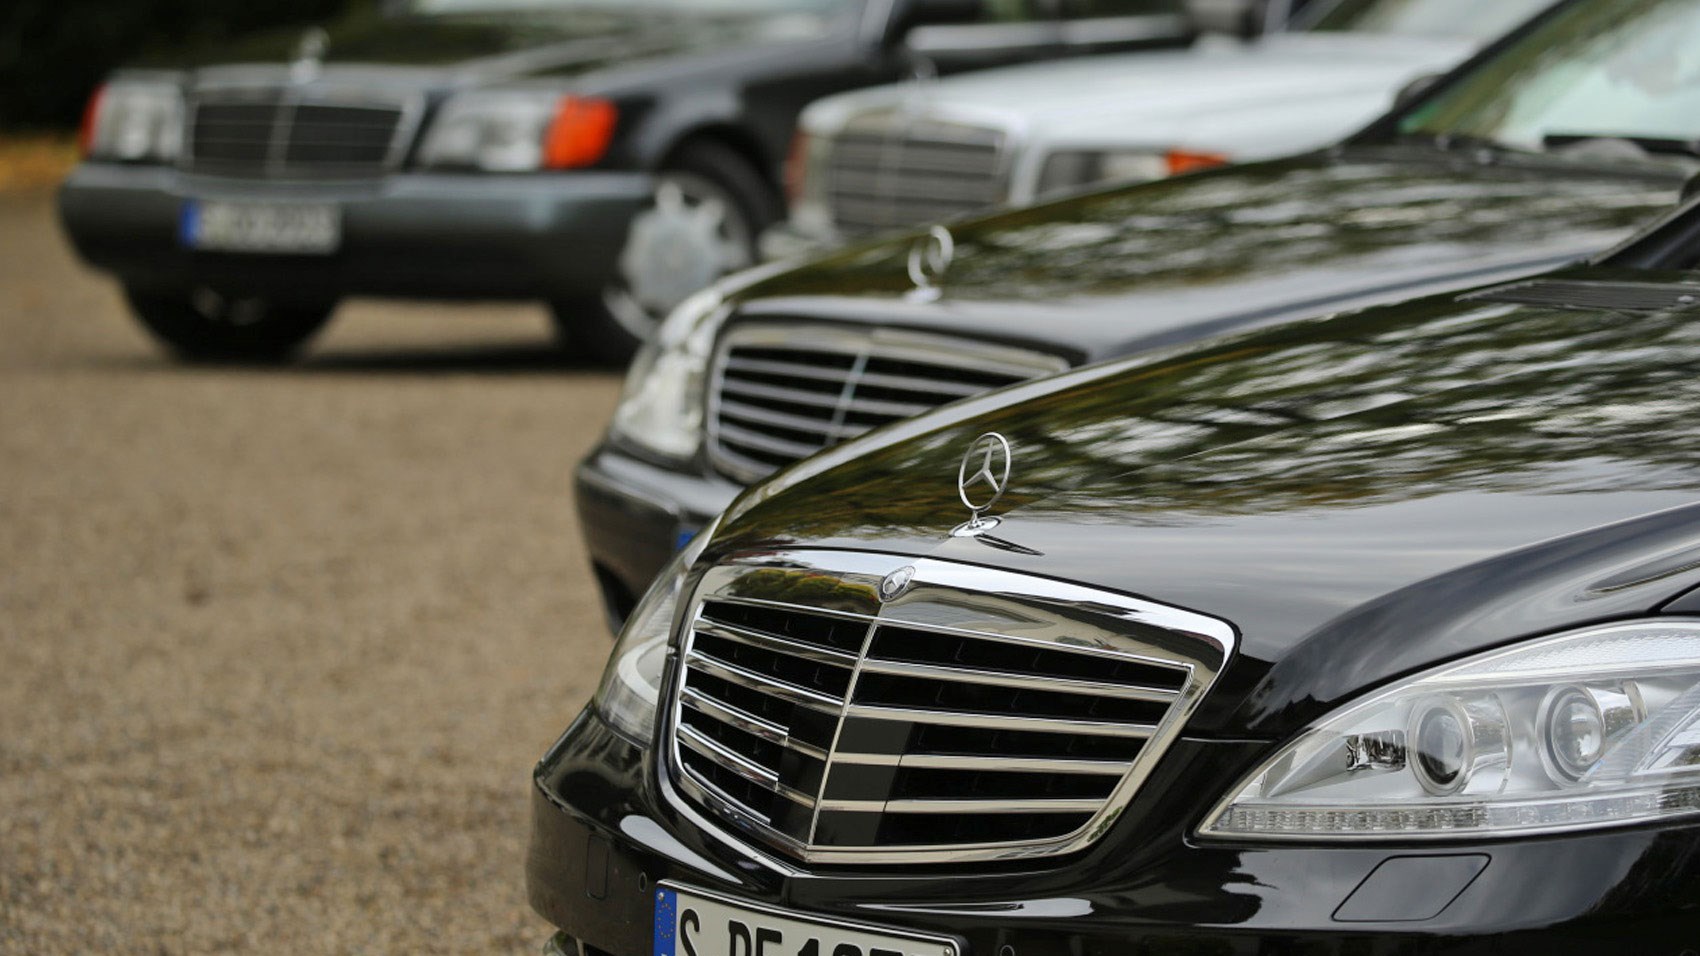 A Guide To Mercedes-Benz Models And Classes - DDR Surrey